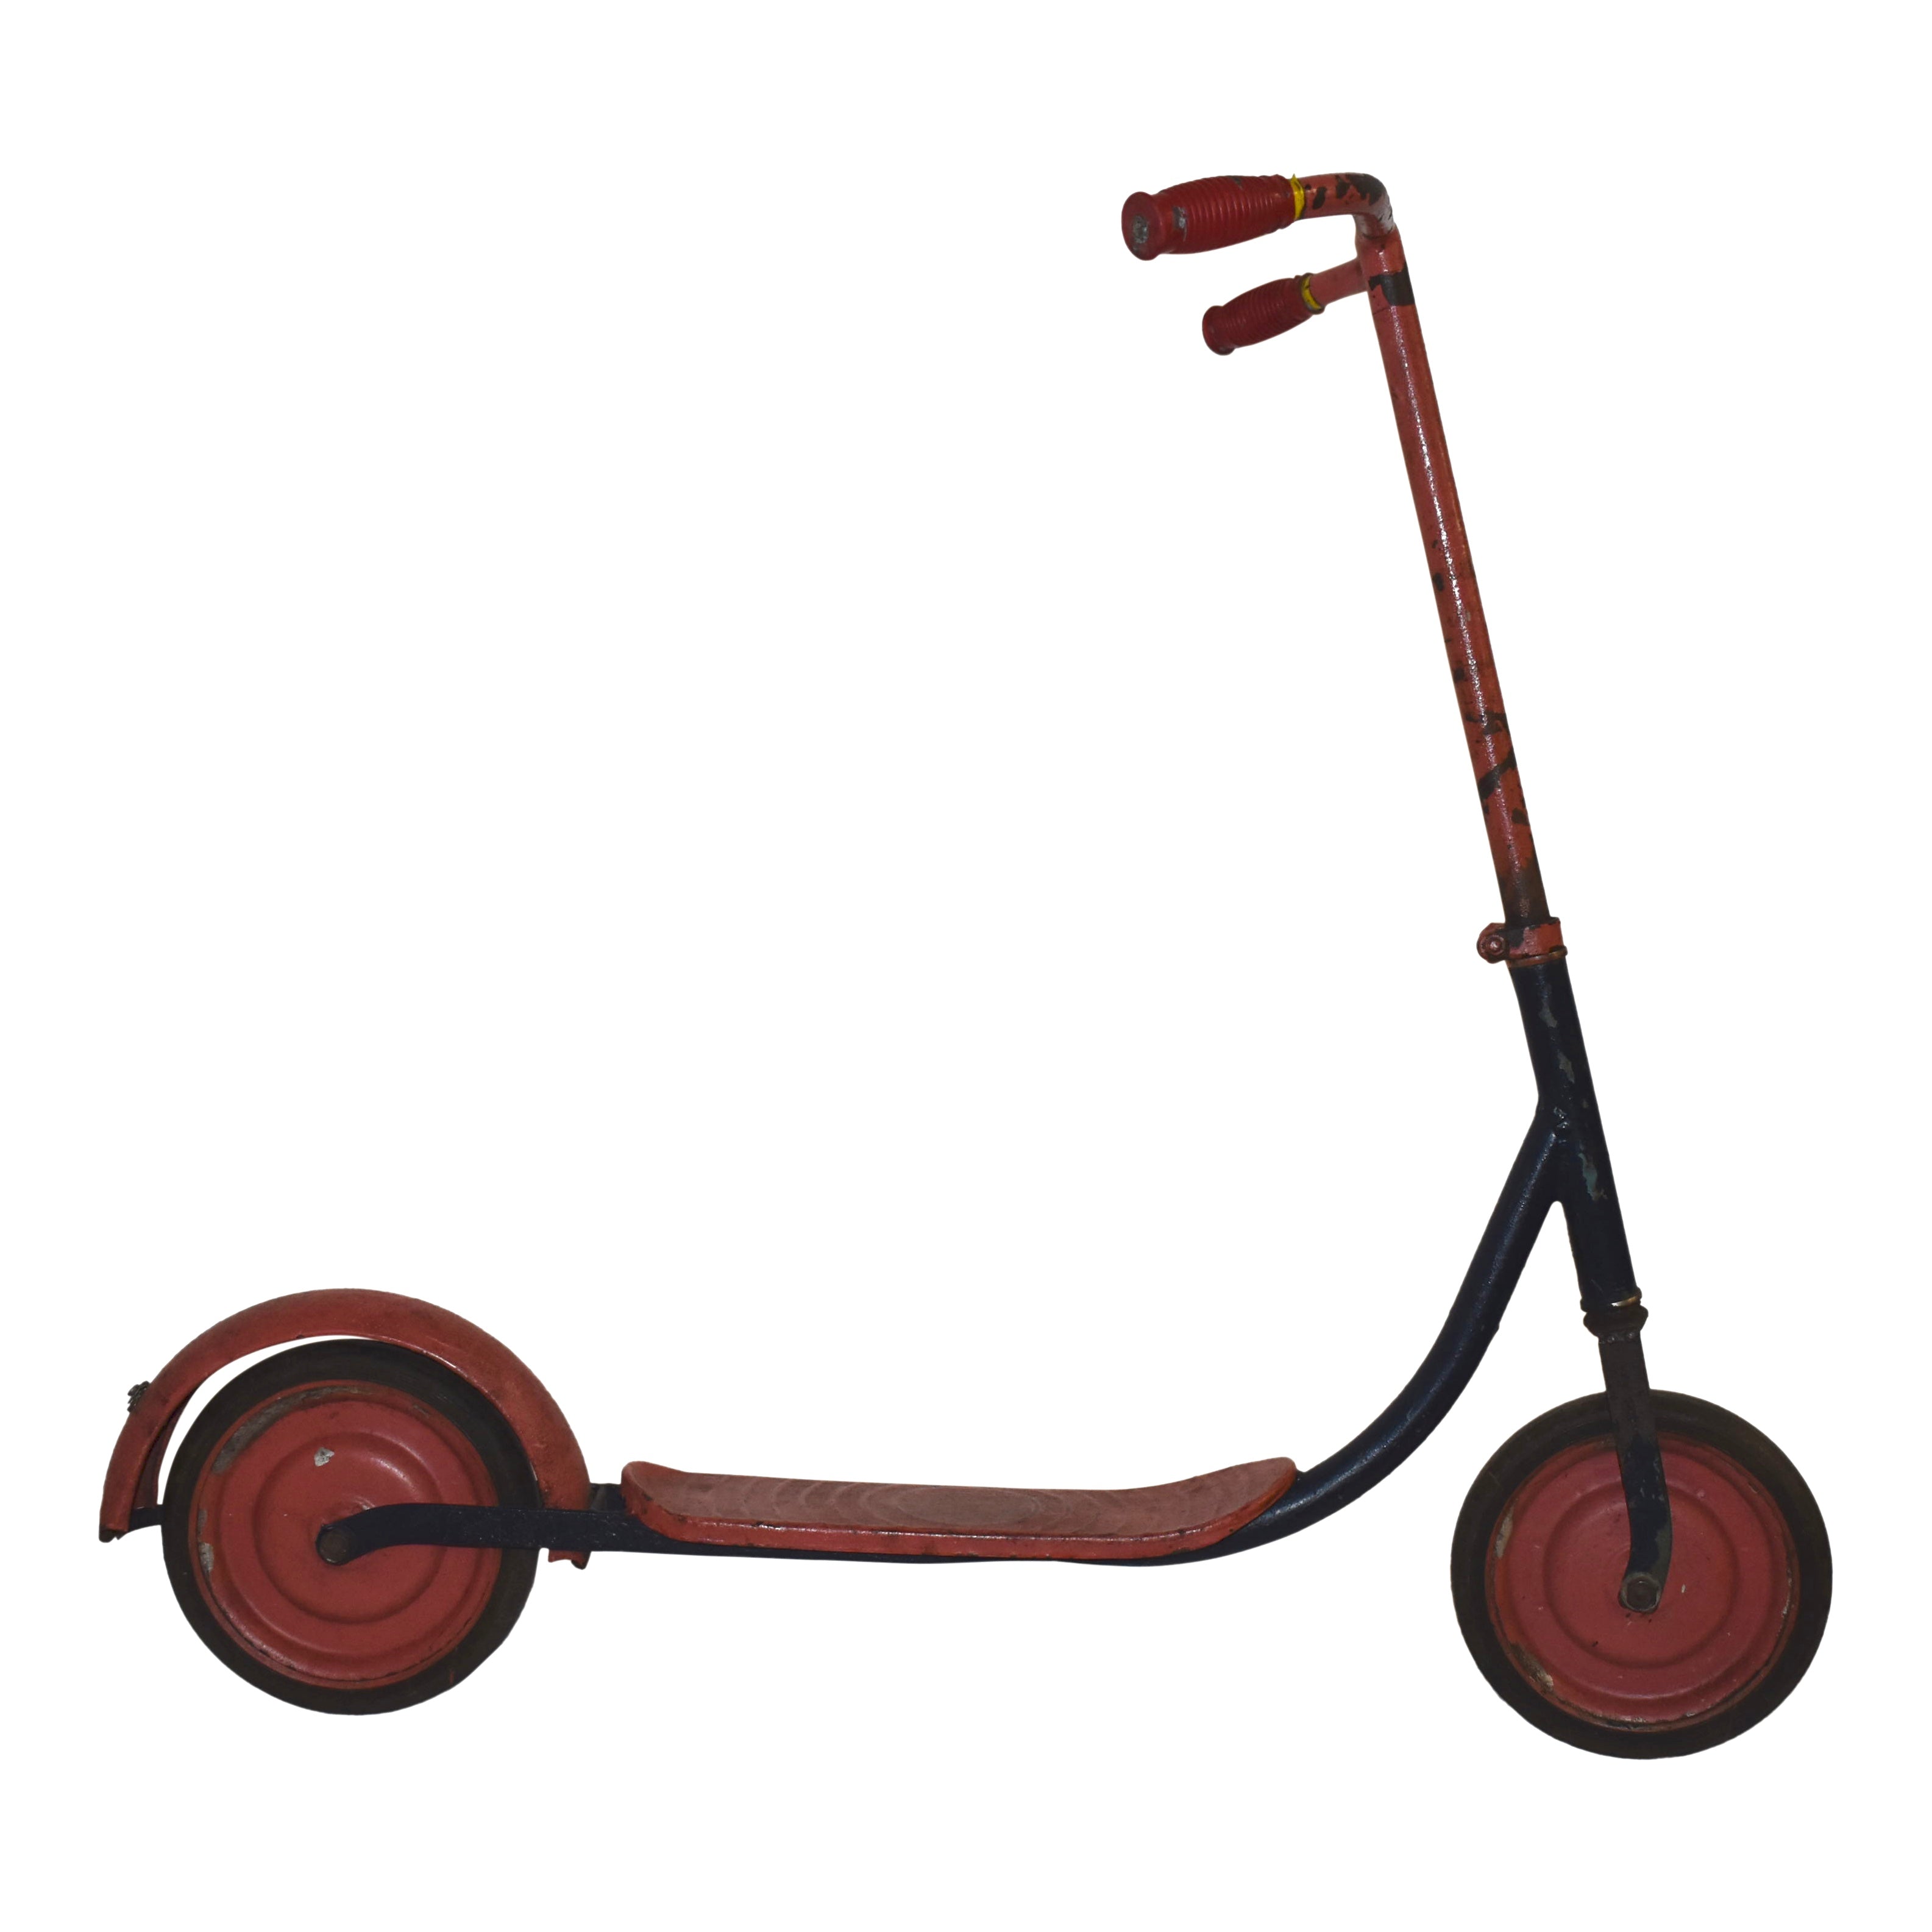 Child's Red Metal Scooter